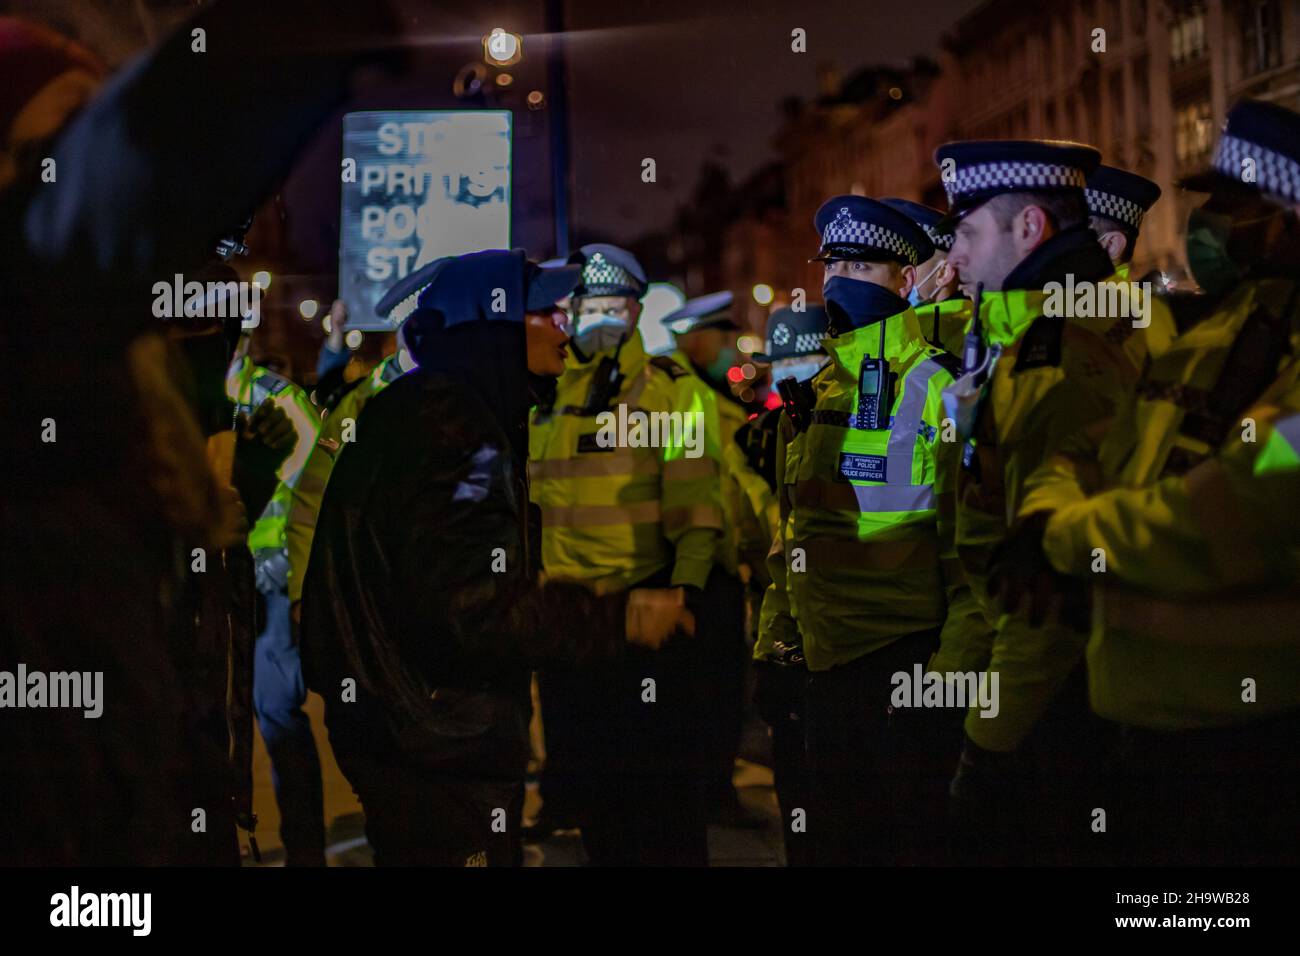 London, England, UK 8th December 2021 Hundreds of protesters gather at Parliament Square in opposition to the Police, Crime, Sentencing and Courts Bill with heated exchanges taking place between the police and protesters as the night drew in. Credit: Denise Laura Baker/Alamy Live News Stock Photo